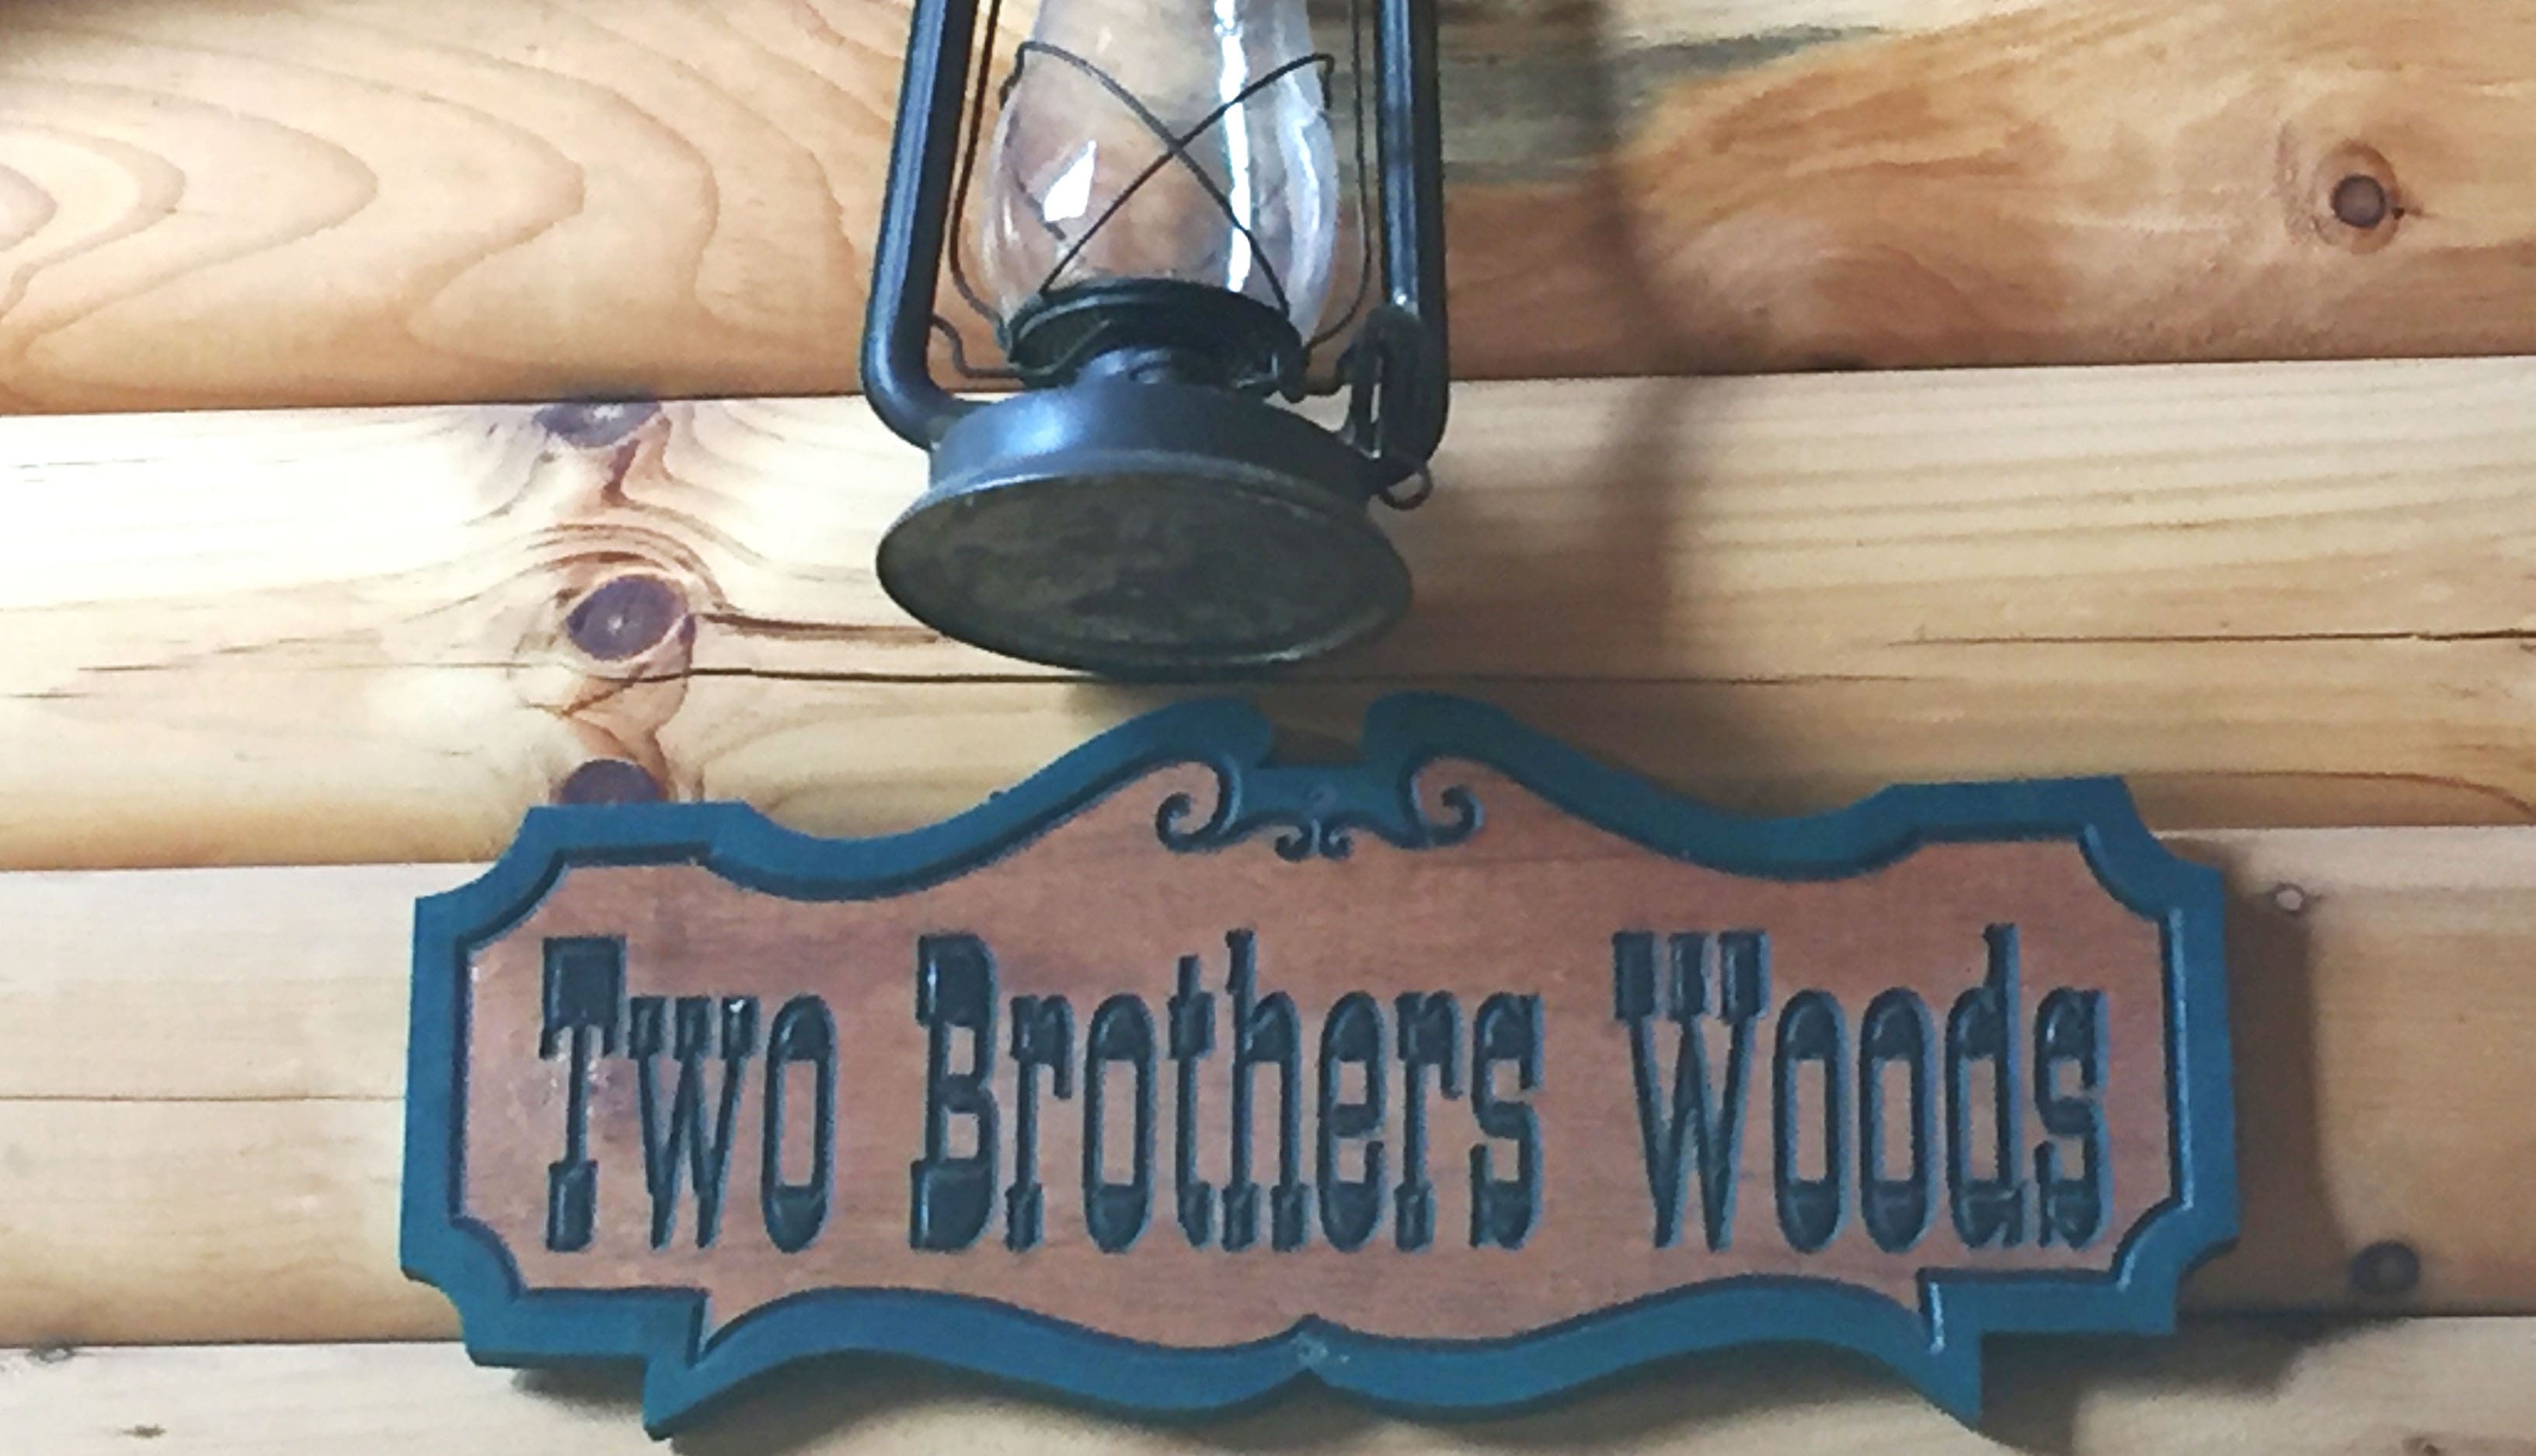 Two Brothers Woods!